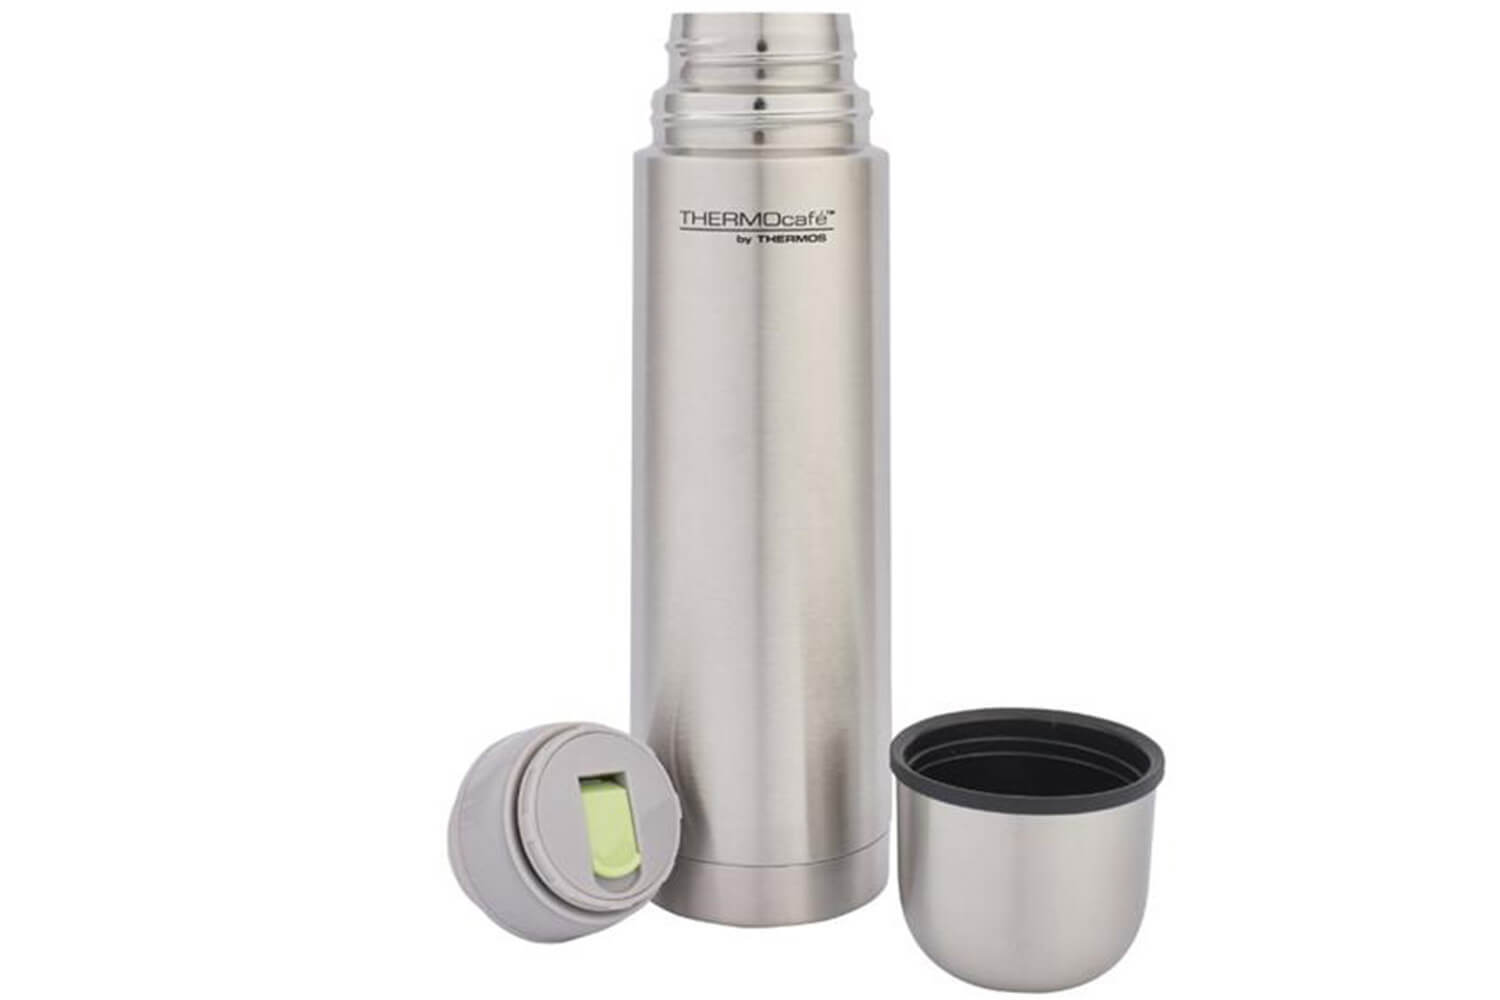 BOUTEILLE ISOTHERME THERMOCAFE EVERYDAY 0,5L